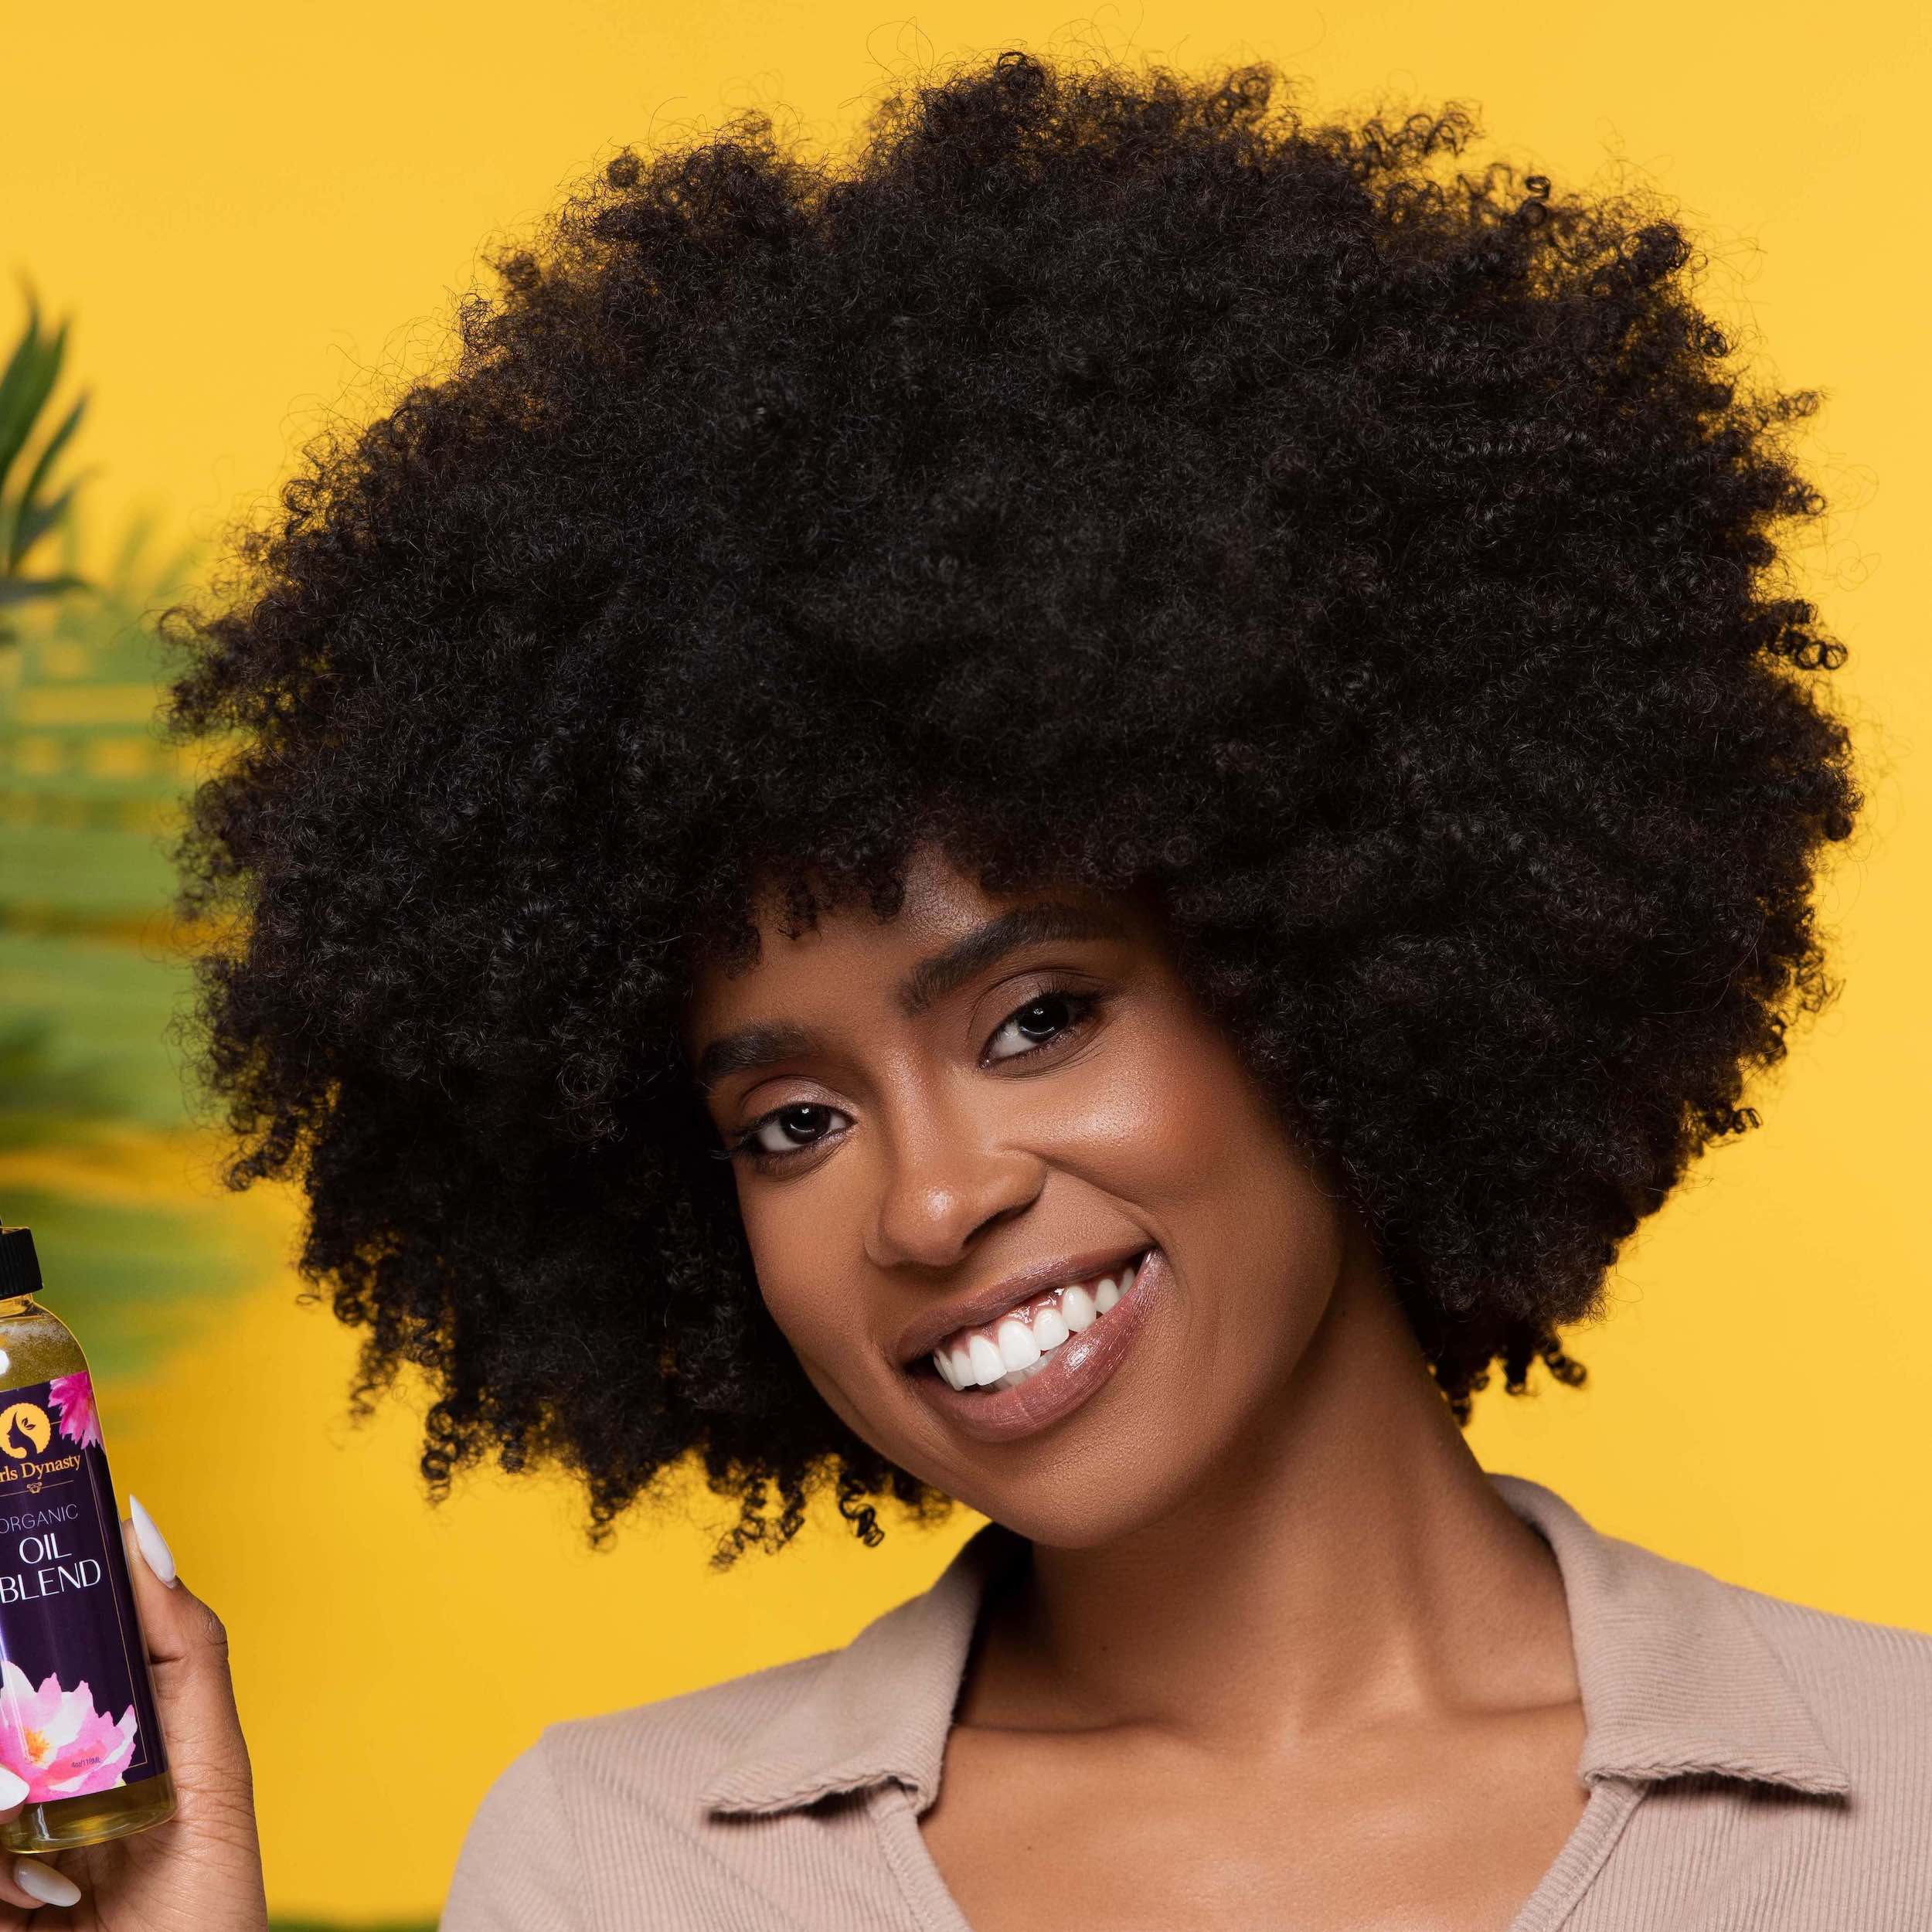 A model smiling while holding a bottle of Oil Blend in front of an orange backdrop.